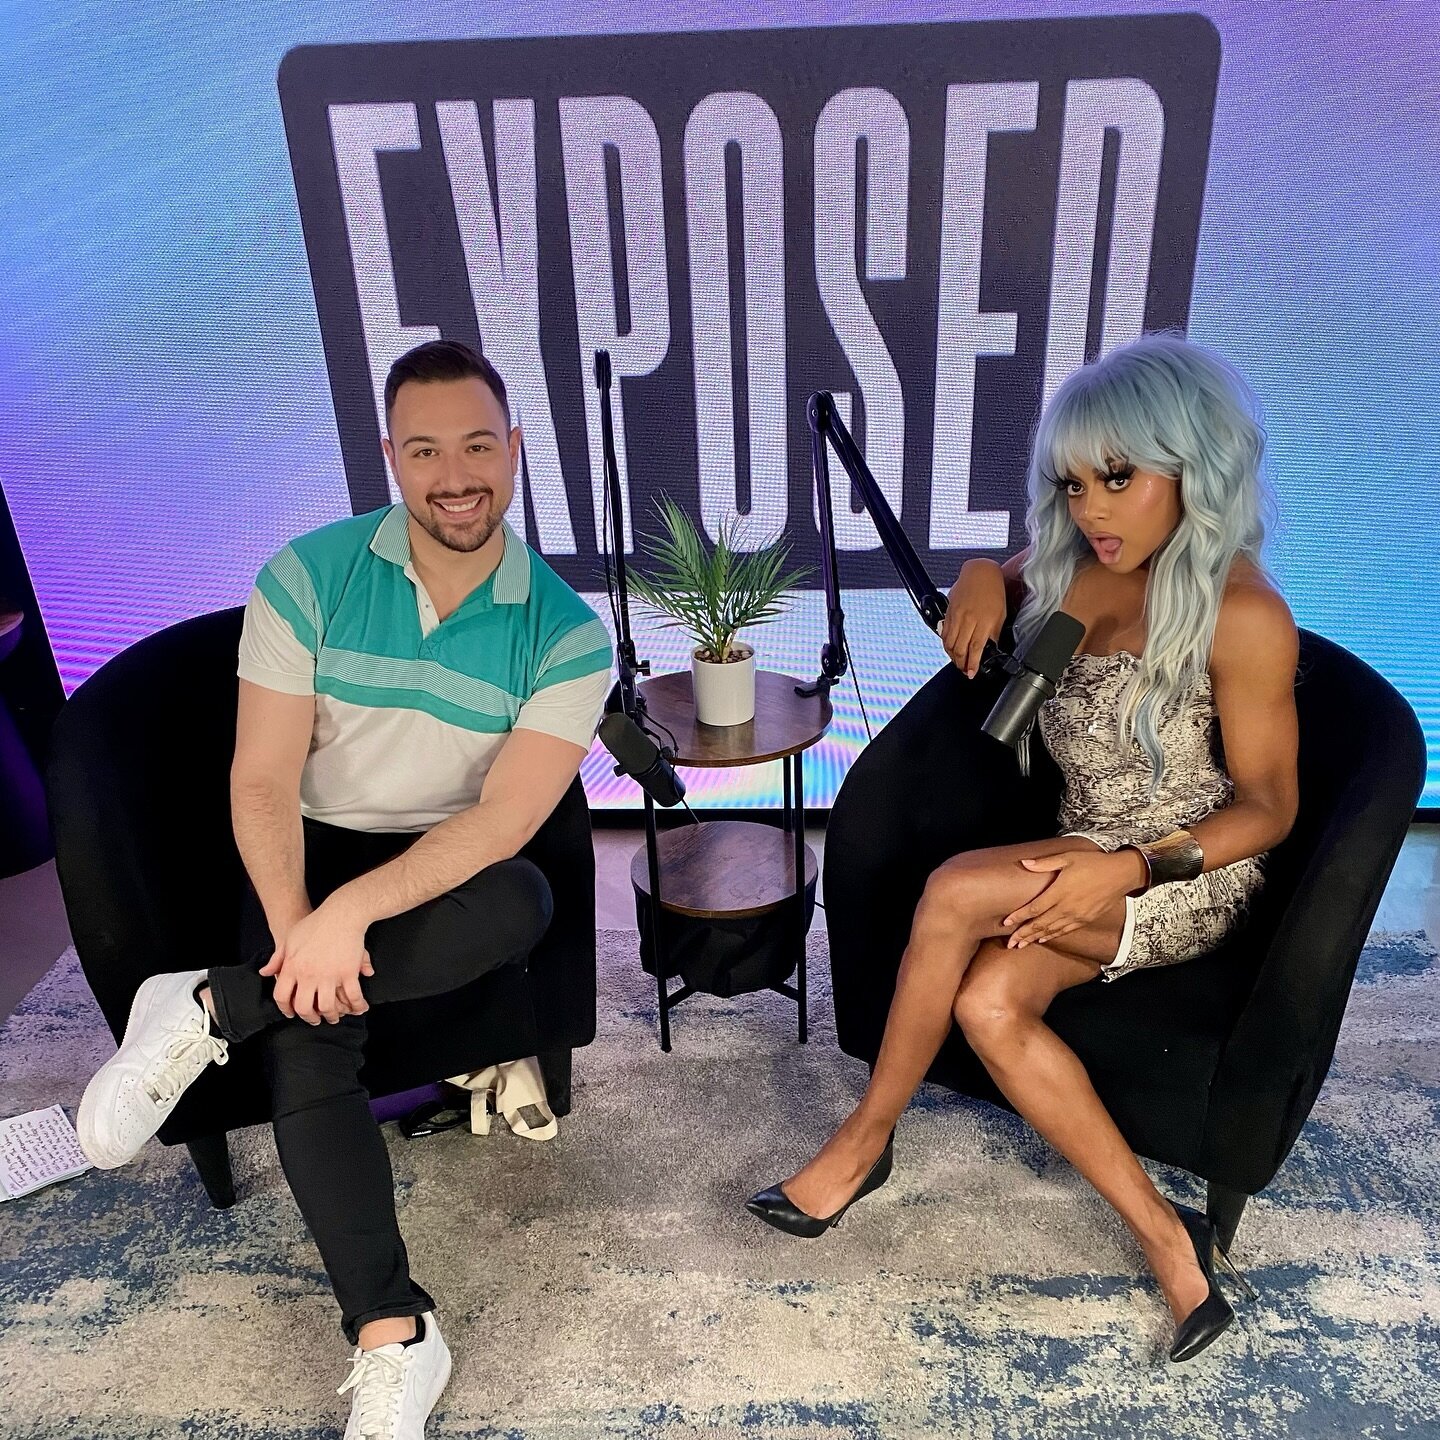 Only two days away until a new season of Exposed drops on @outtv with special guest @heidincloset! Heidi gives me a gift but is it her quick shot? 😜